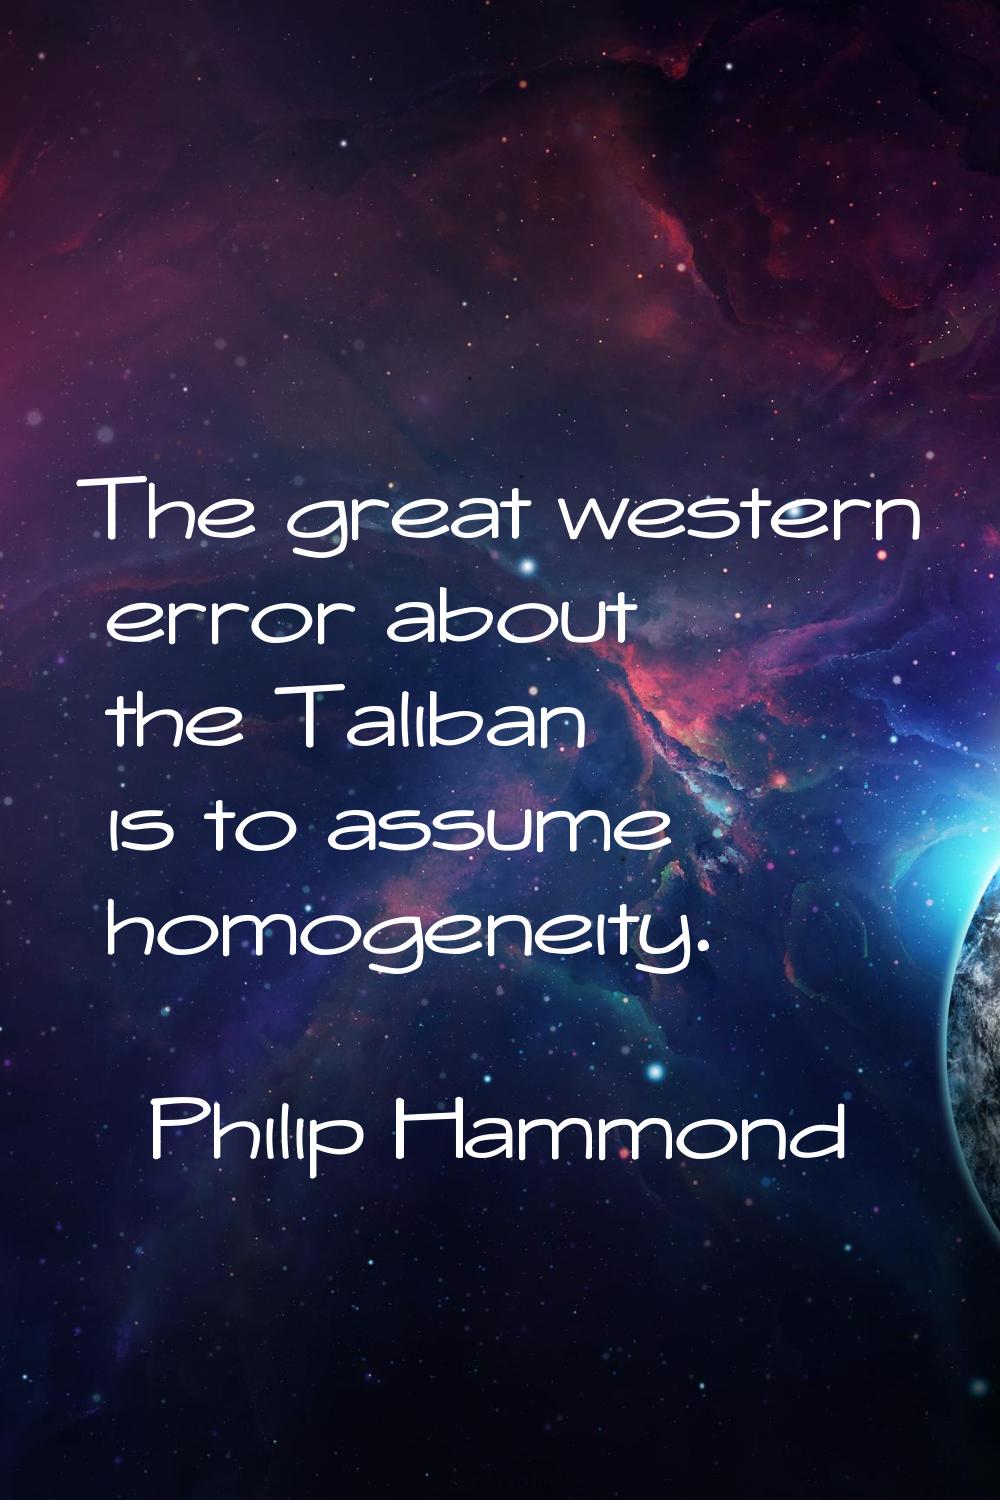 The great western error about the Taliban is to assume homogeneity.